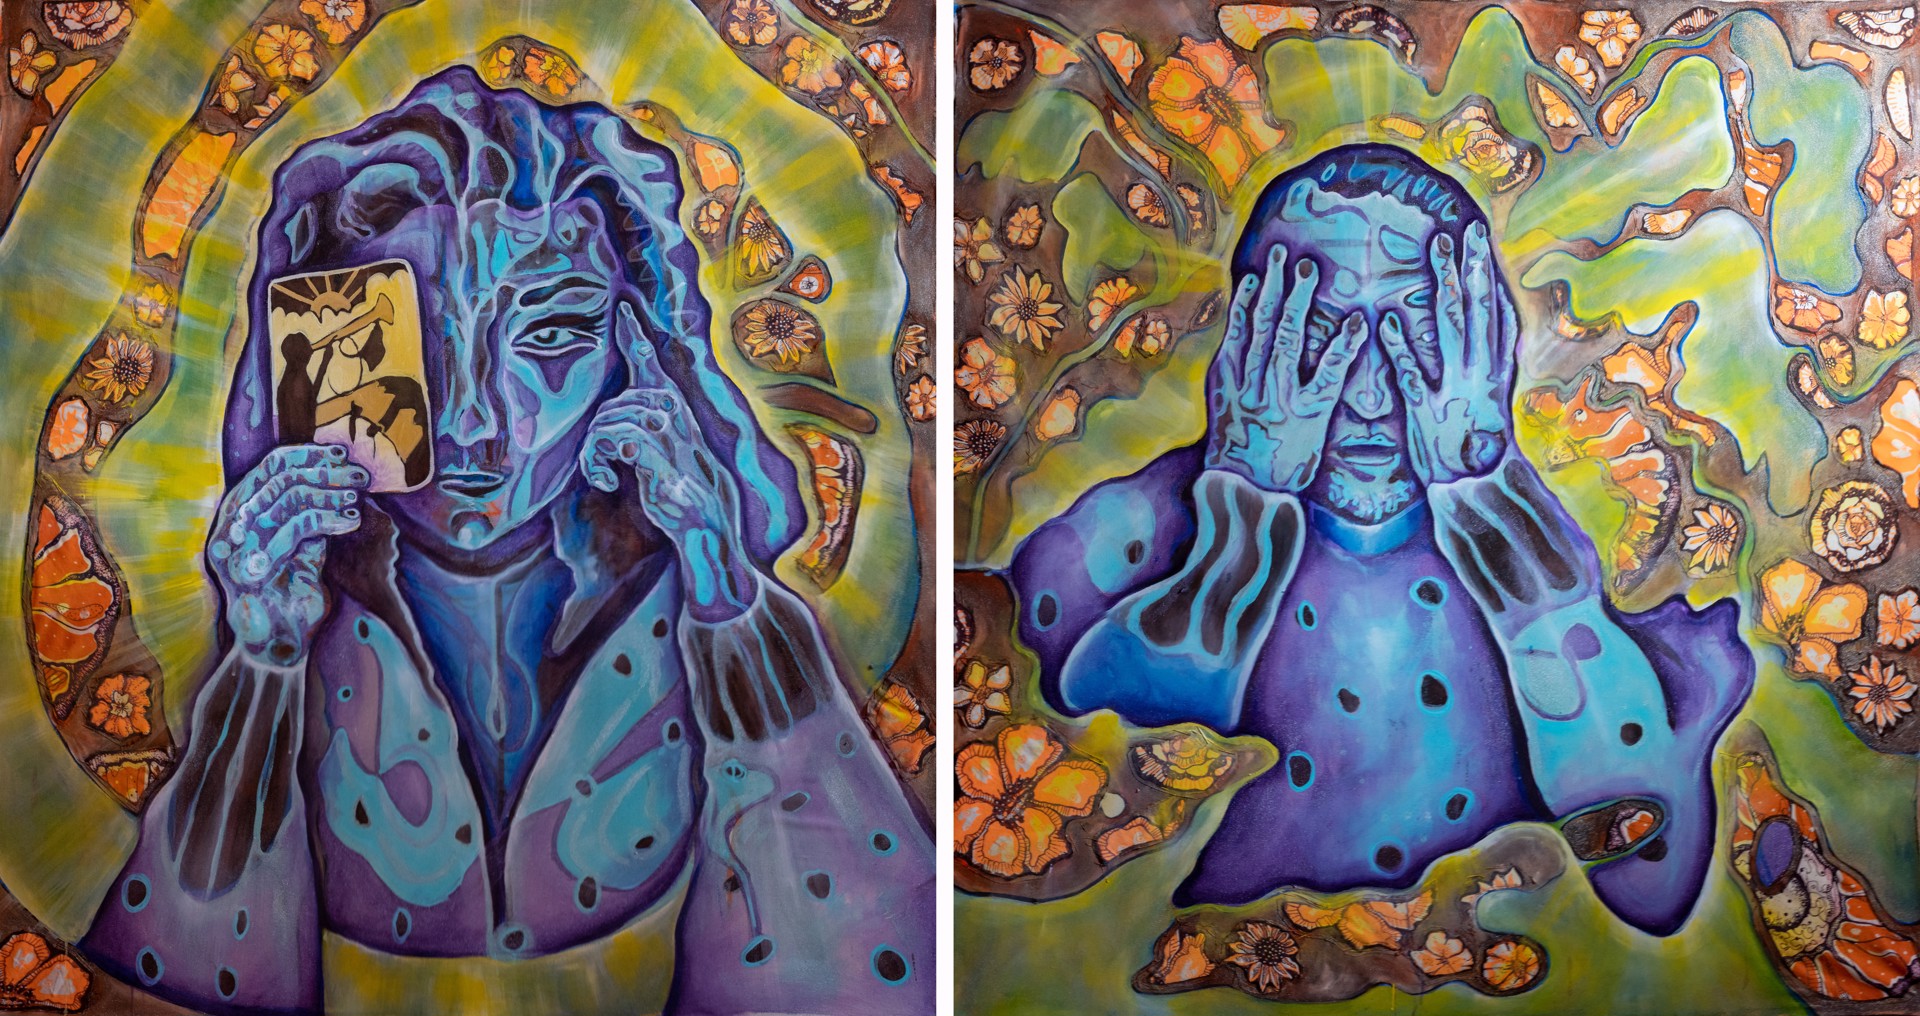 Fears & Anxieties (diptych) by Laurie Shapiro